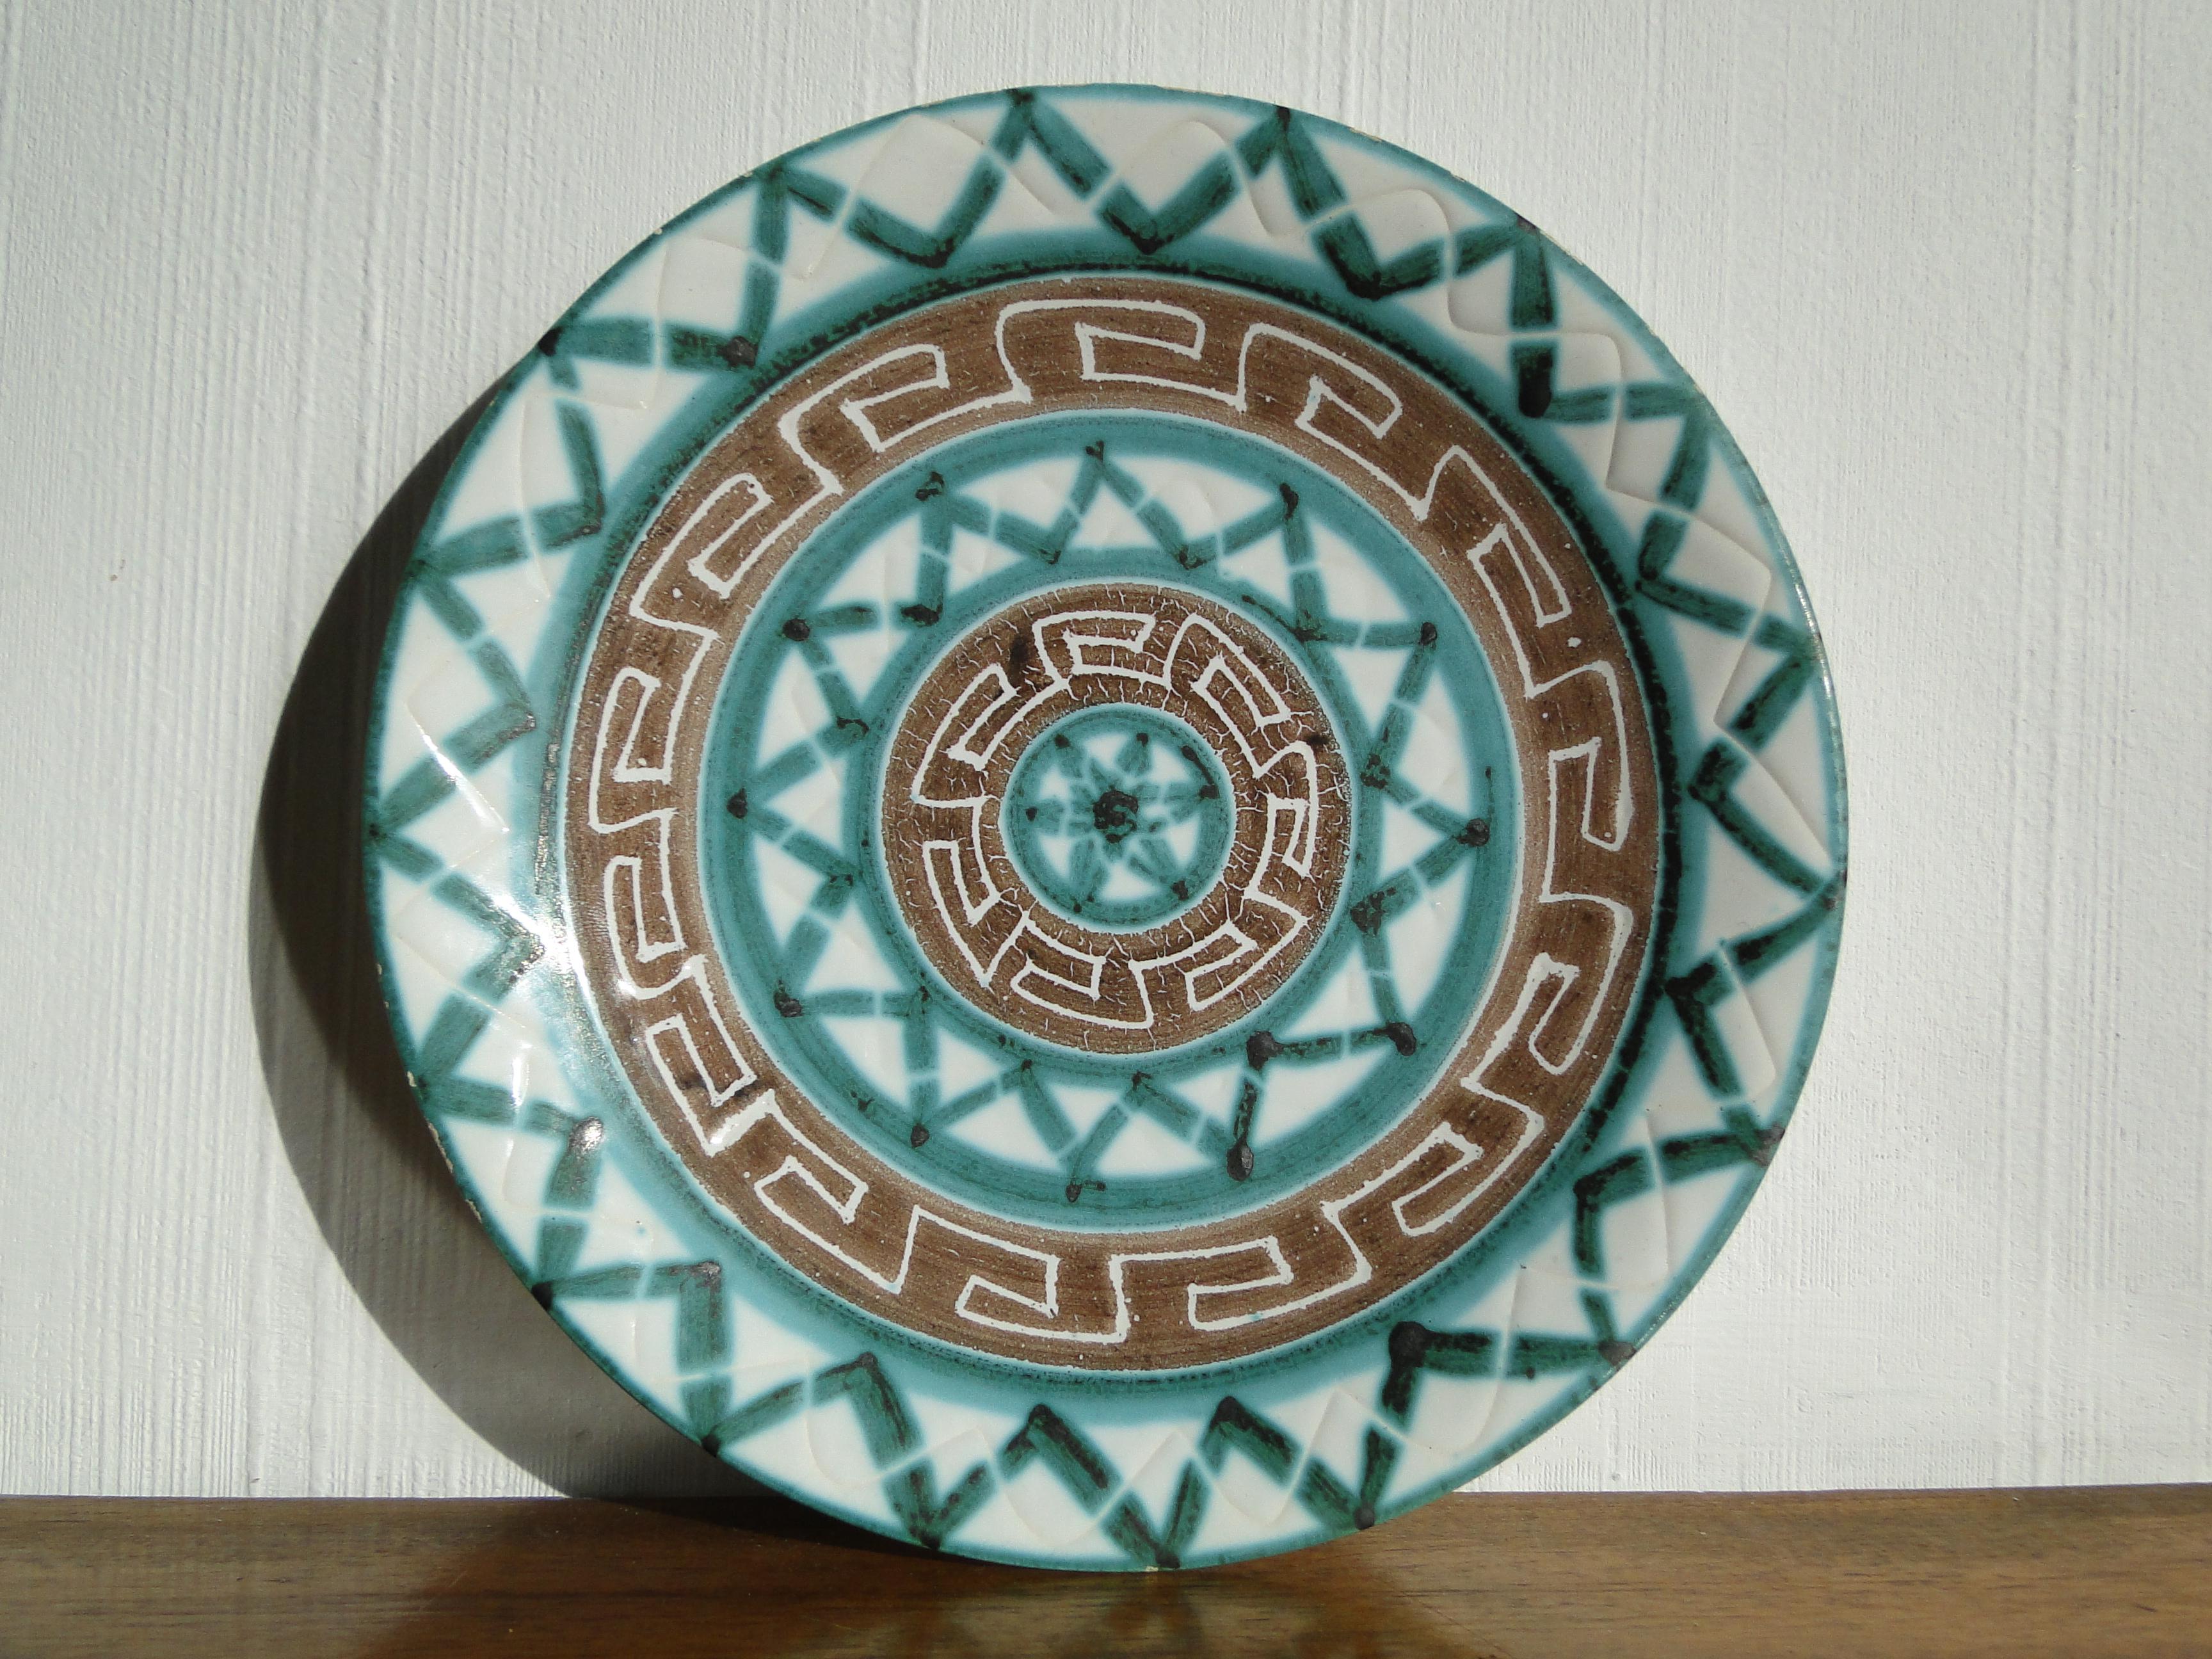 Robert Picault (1919 - 2000)
French ceramist in Vallauris

Robert Picault has contributed to the revival of culinary ceramics by updating traditional local forms decorated with lines and geometric designs.

His identity style has been a great